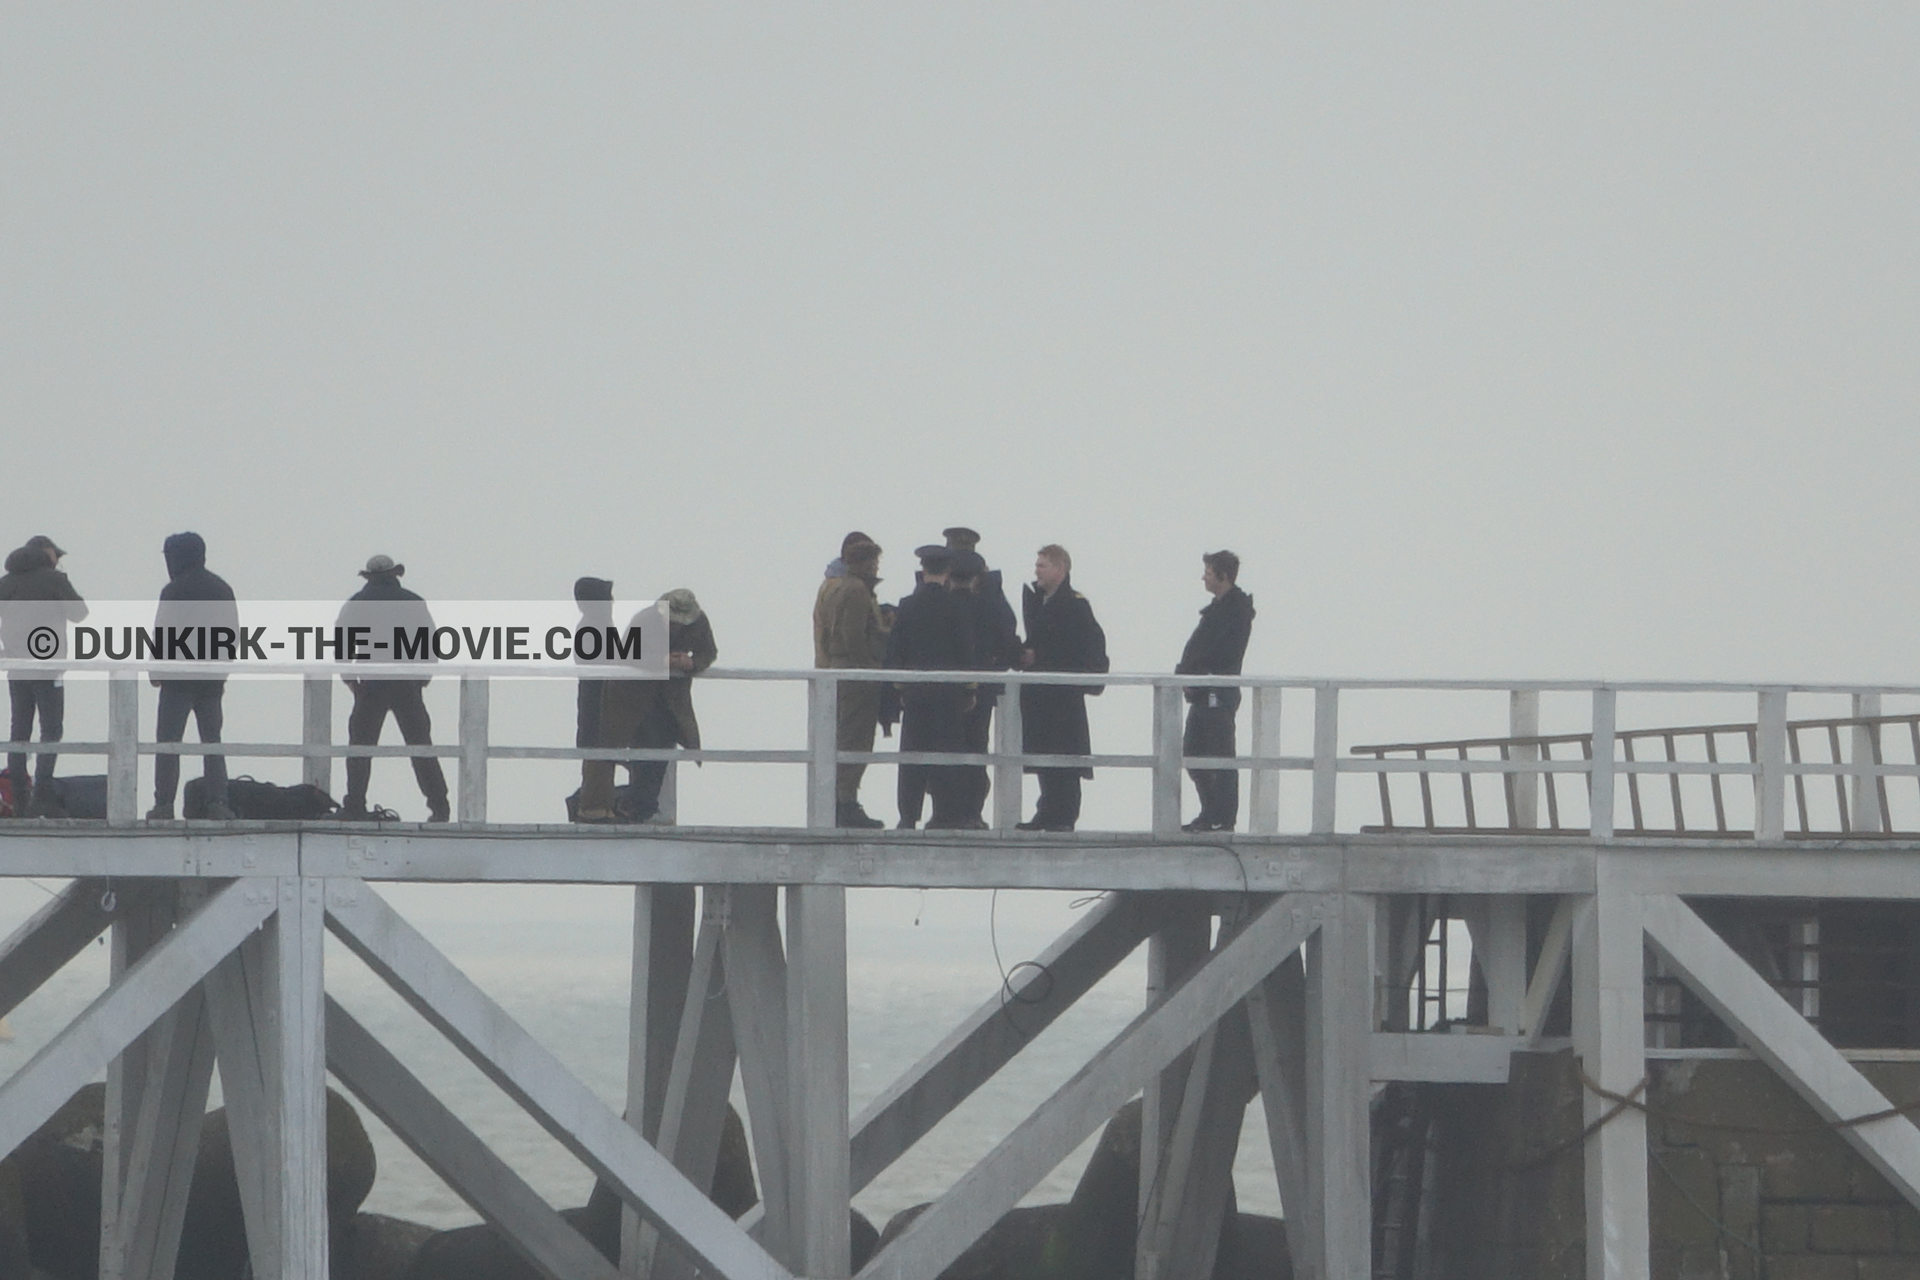 Picture with grey sky, supernumeraries, EST pier, Kenneth Branagh, technical team,  from behind the scene of the Dunkirk movie by Nolan